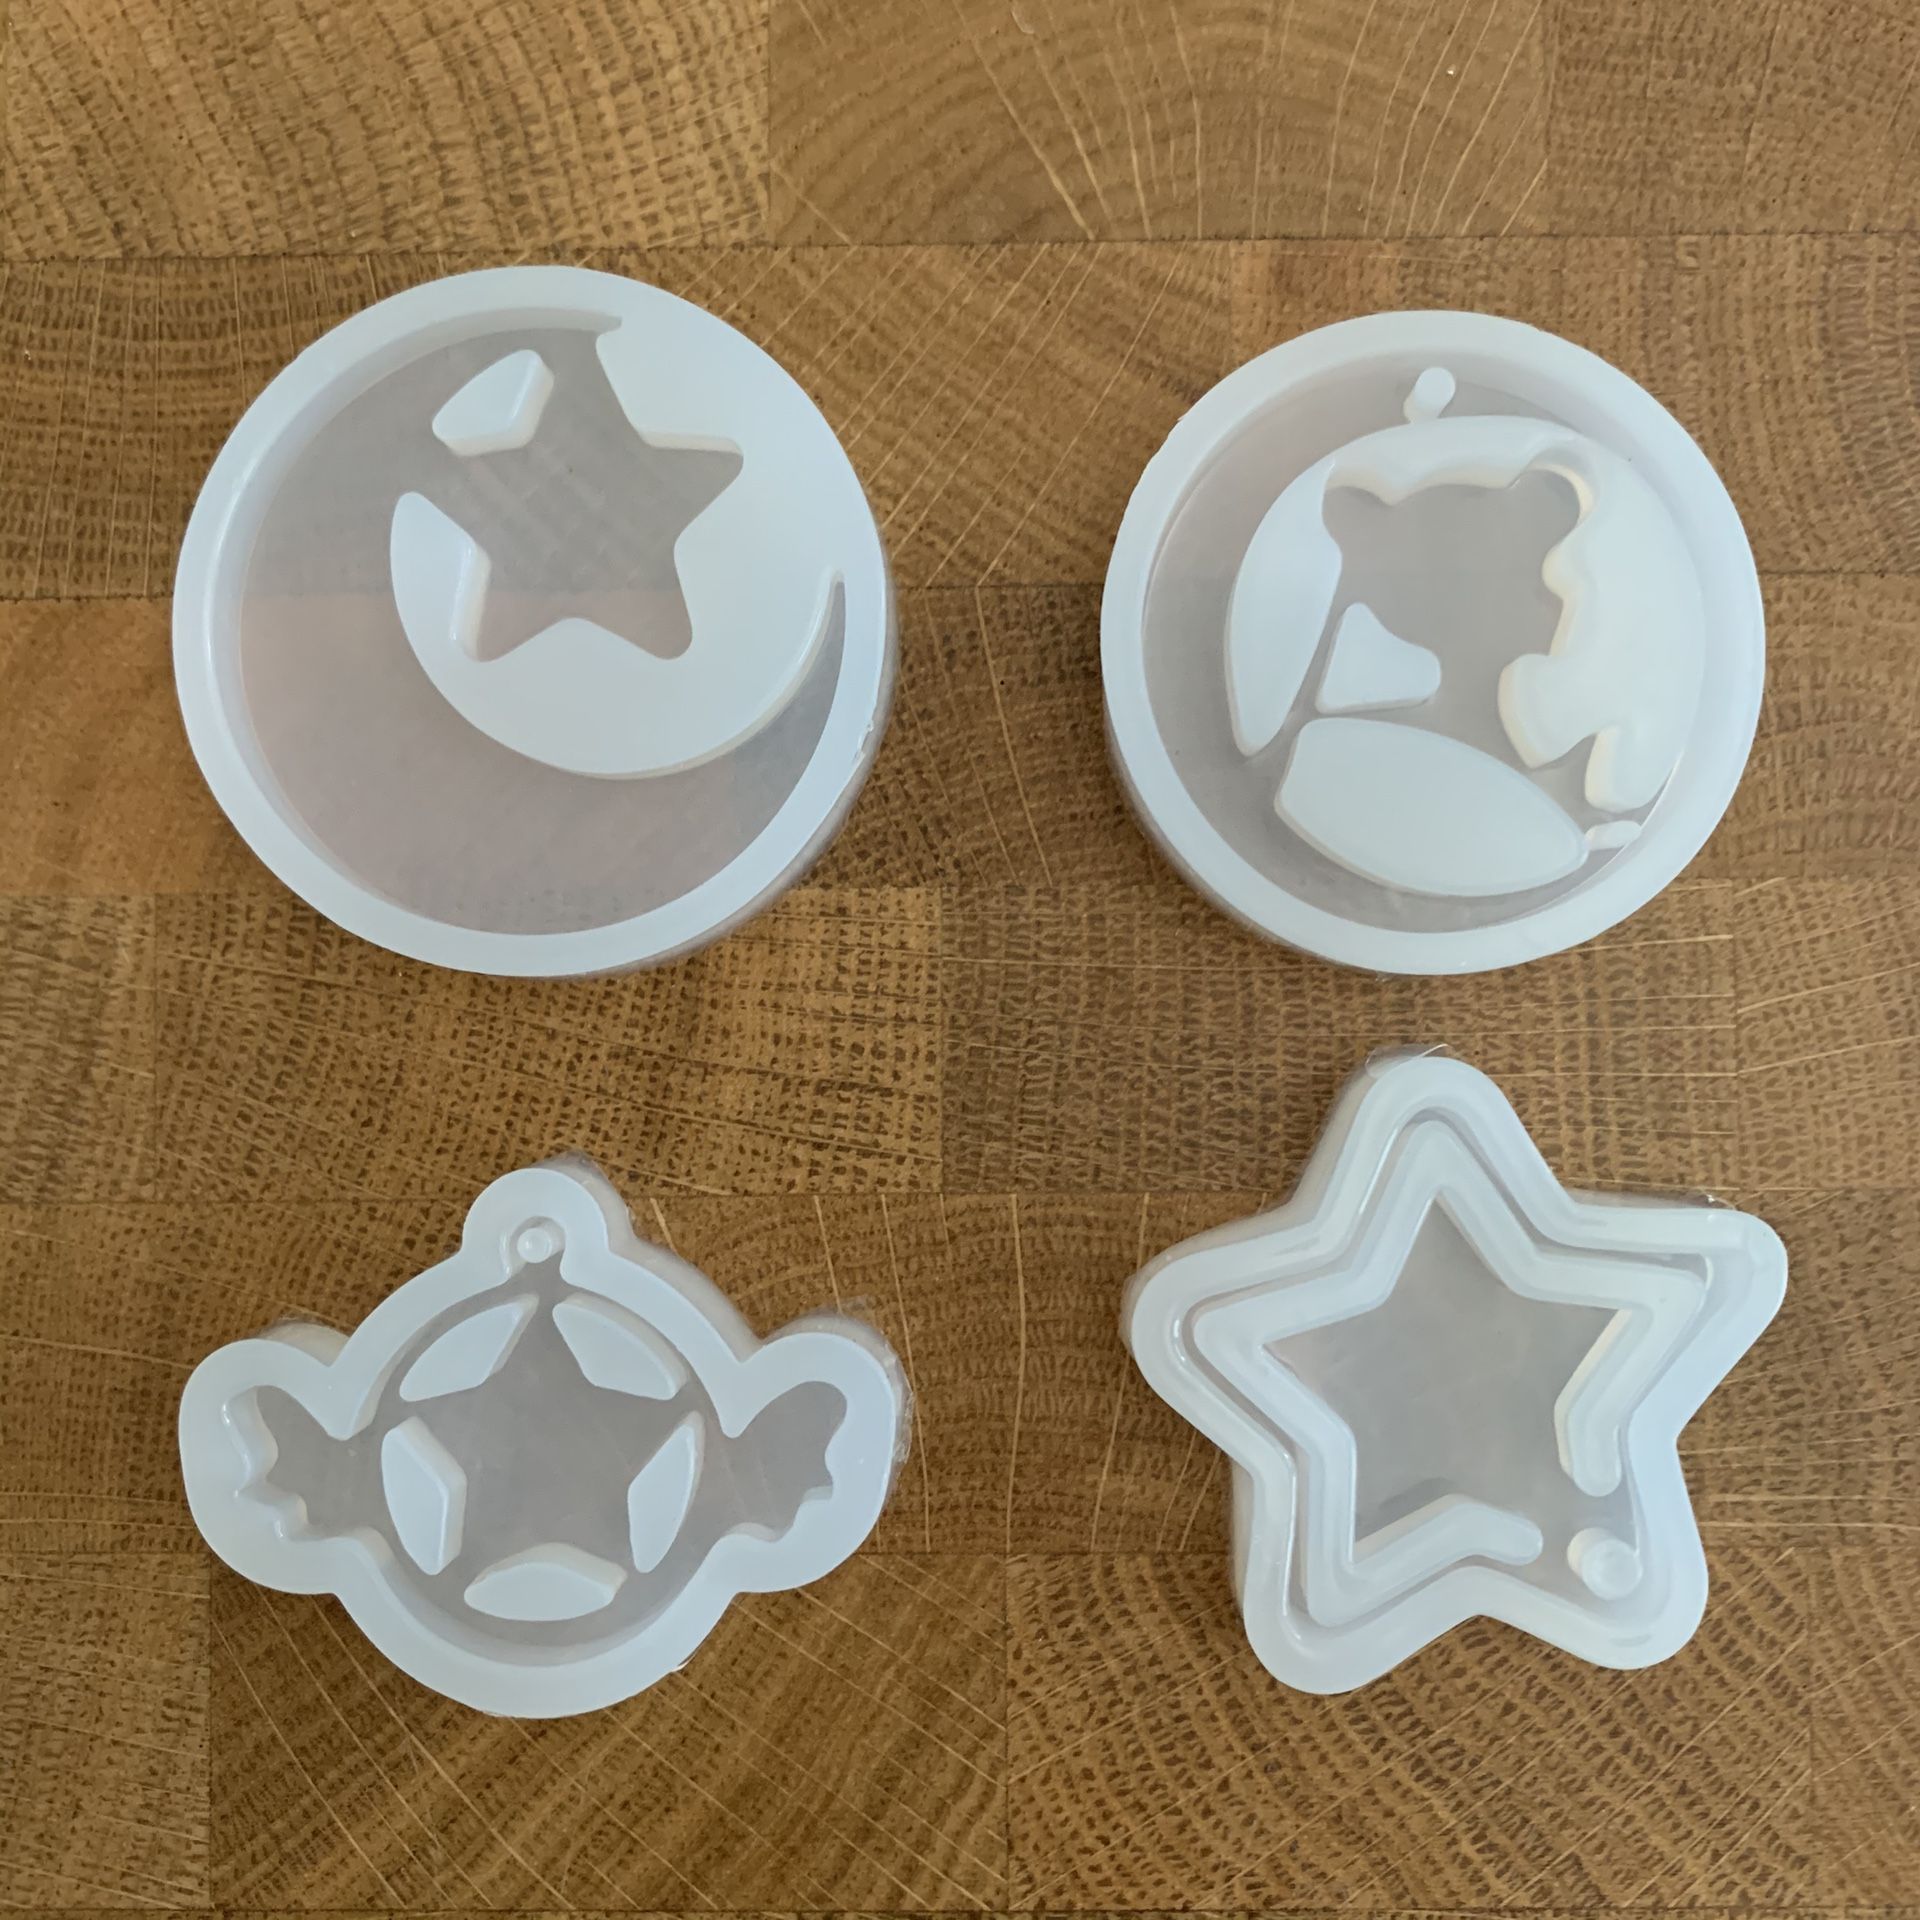 4 Pack of Sailor Moon Molds & Sheets